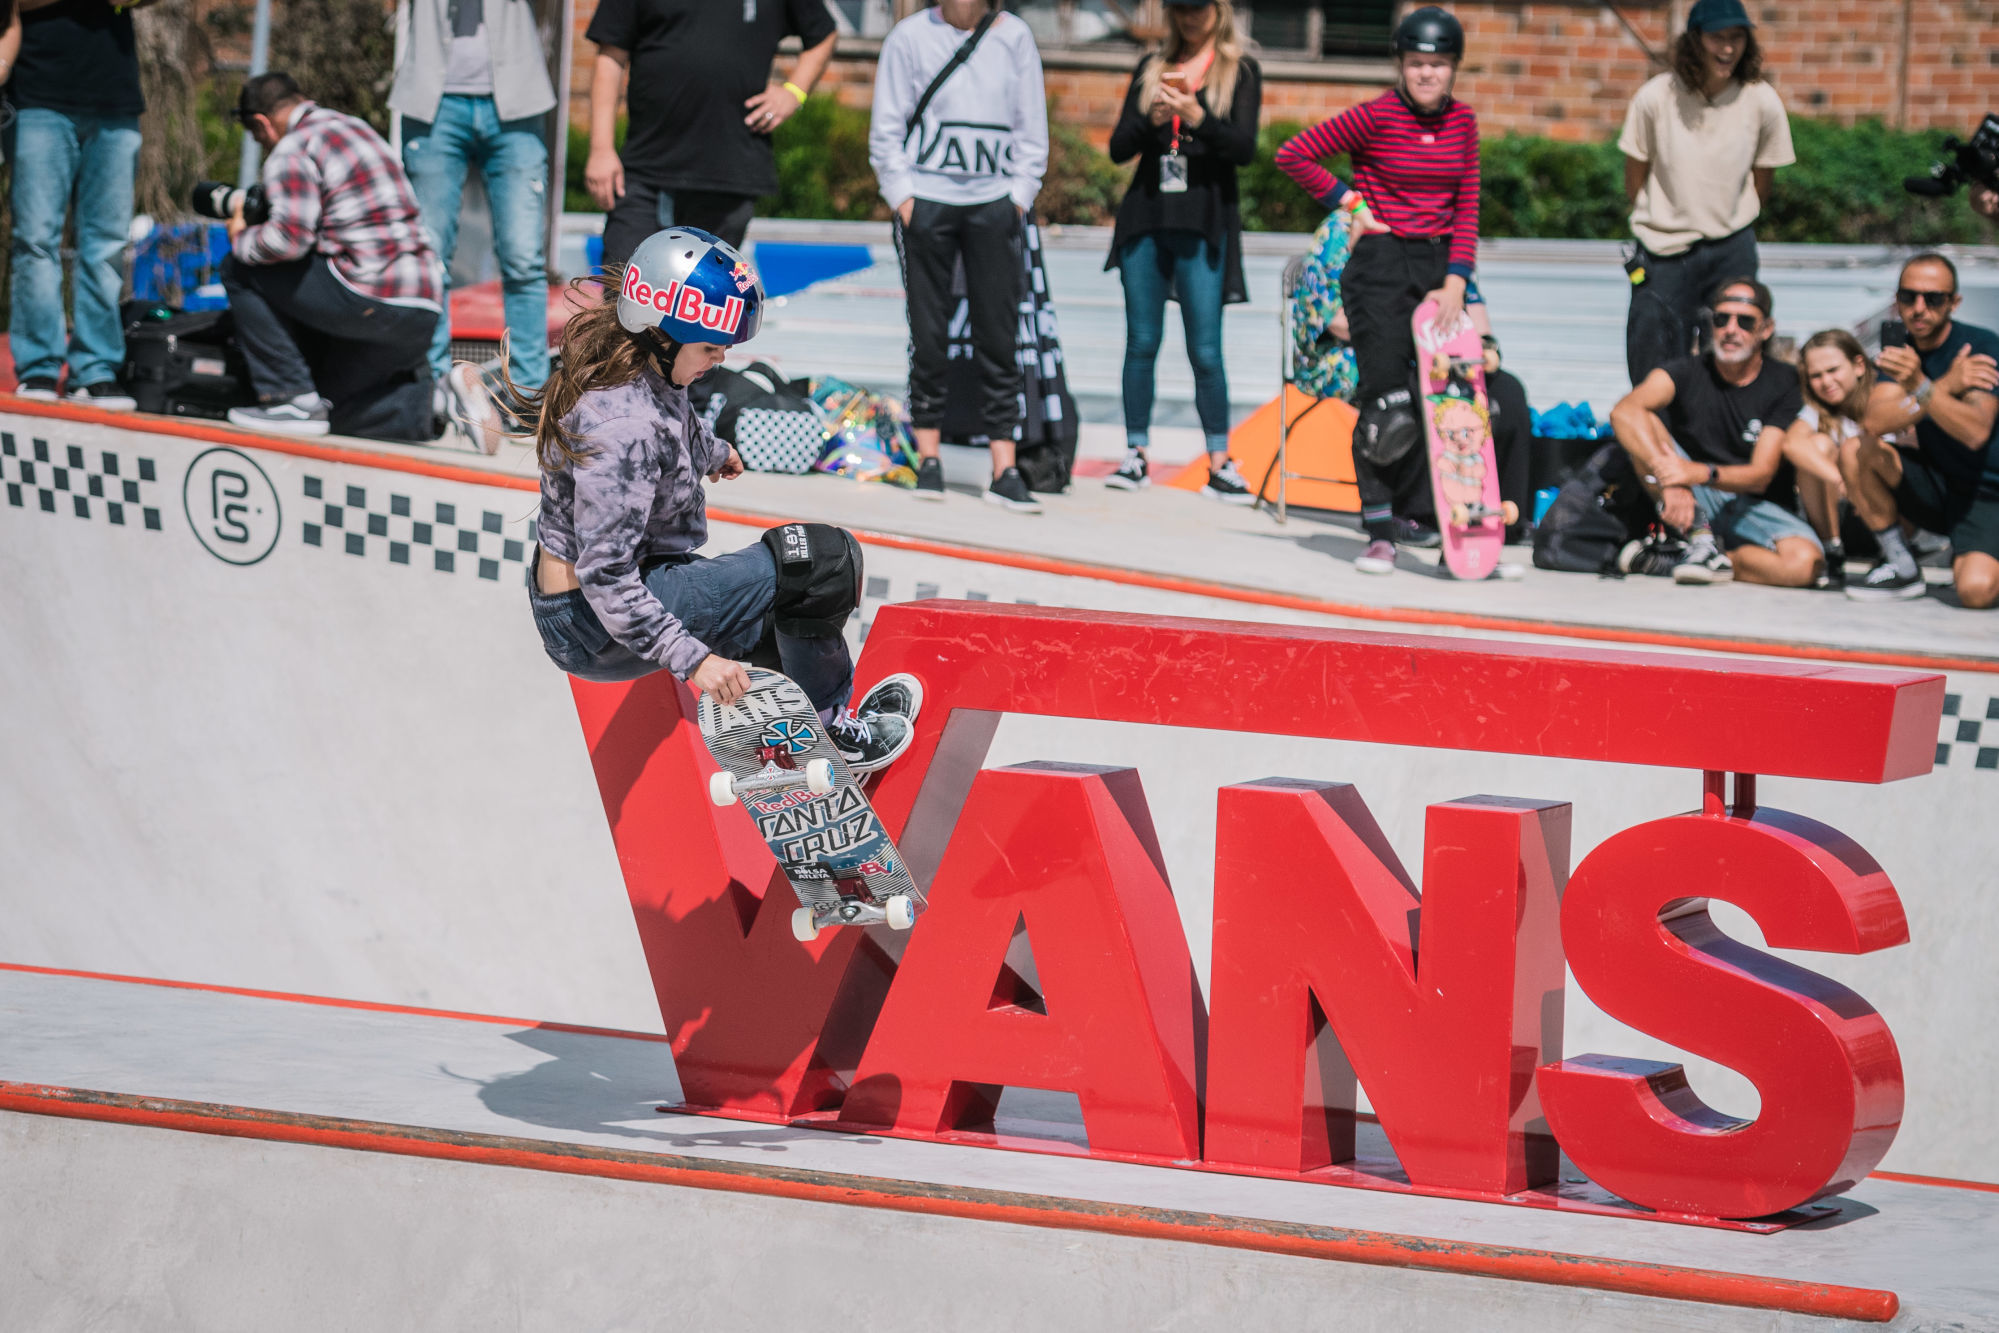 Yndiara Asp of Brazil during the Pro Tour, Vans Park Series, on August 10, 2019 in Chelles, France  ( Photo by Charles Schneider / Icon Sport )